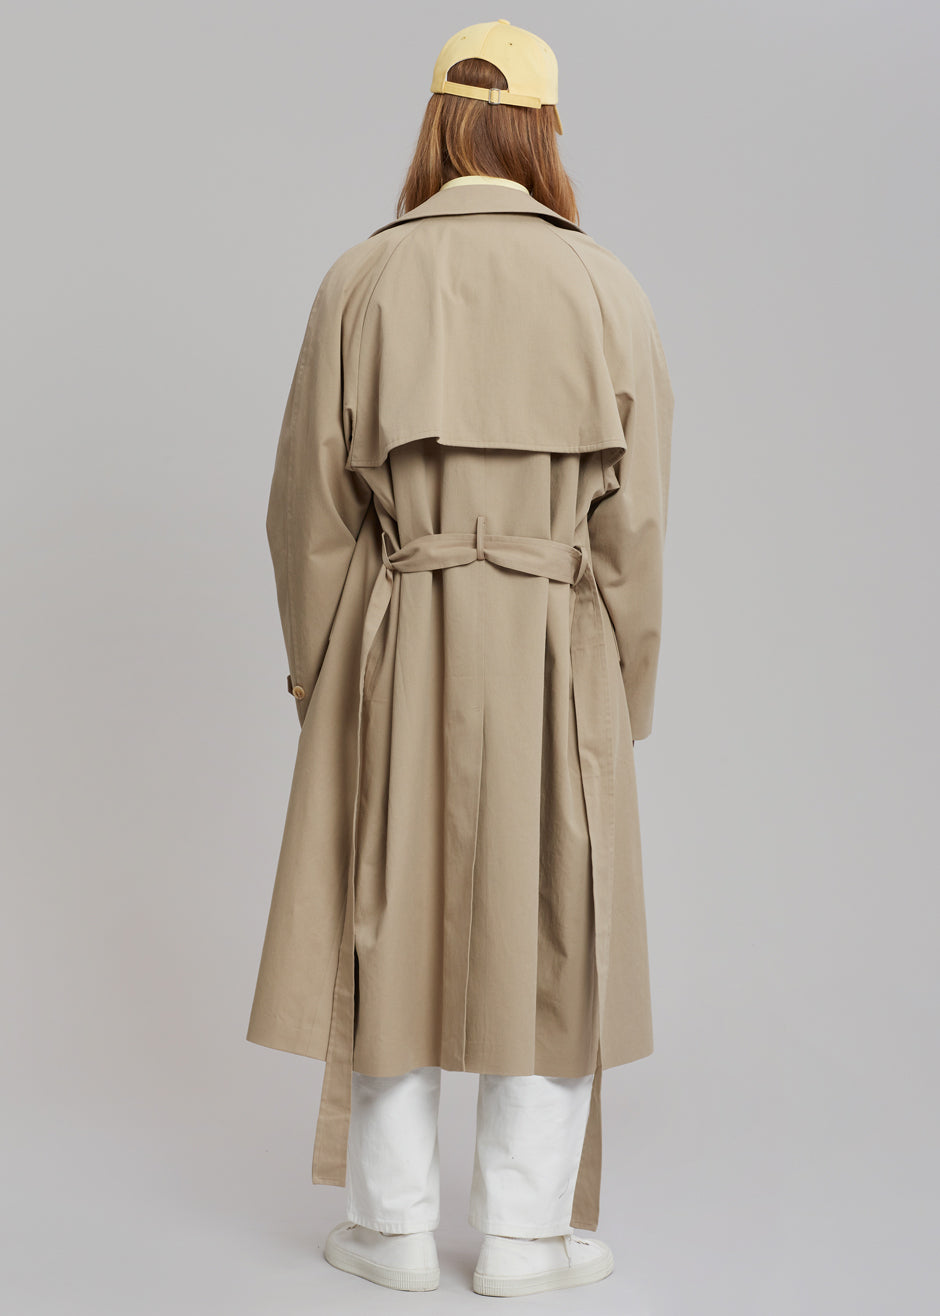 Umi Belted Trench Coat - Beige - 16